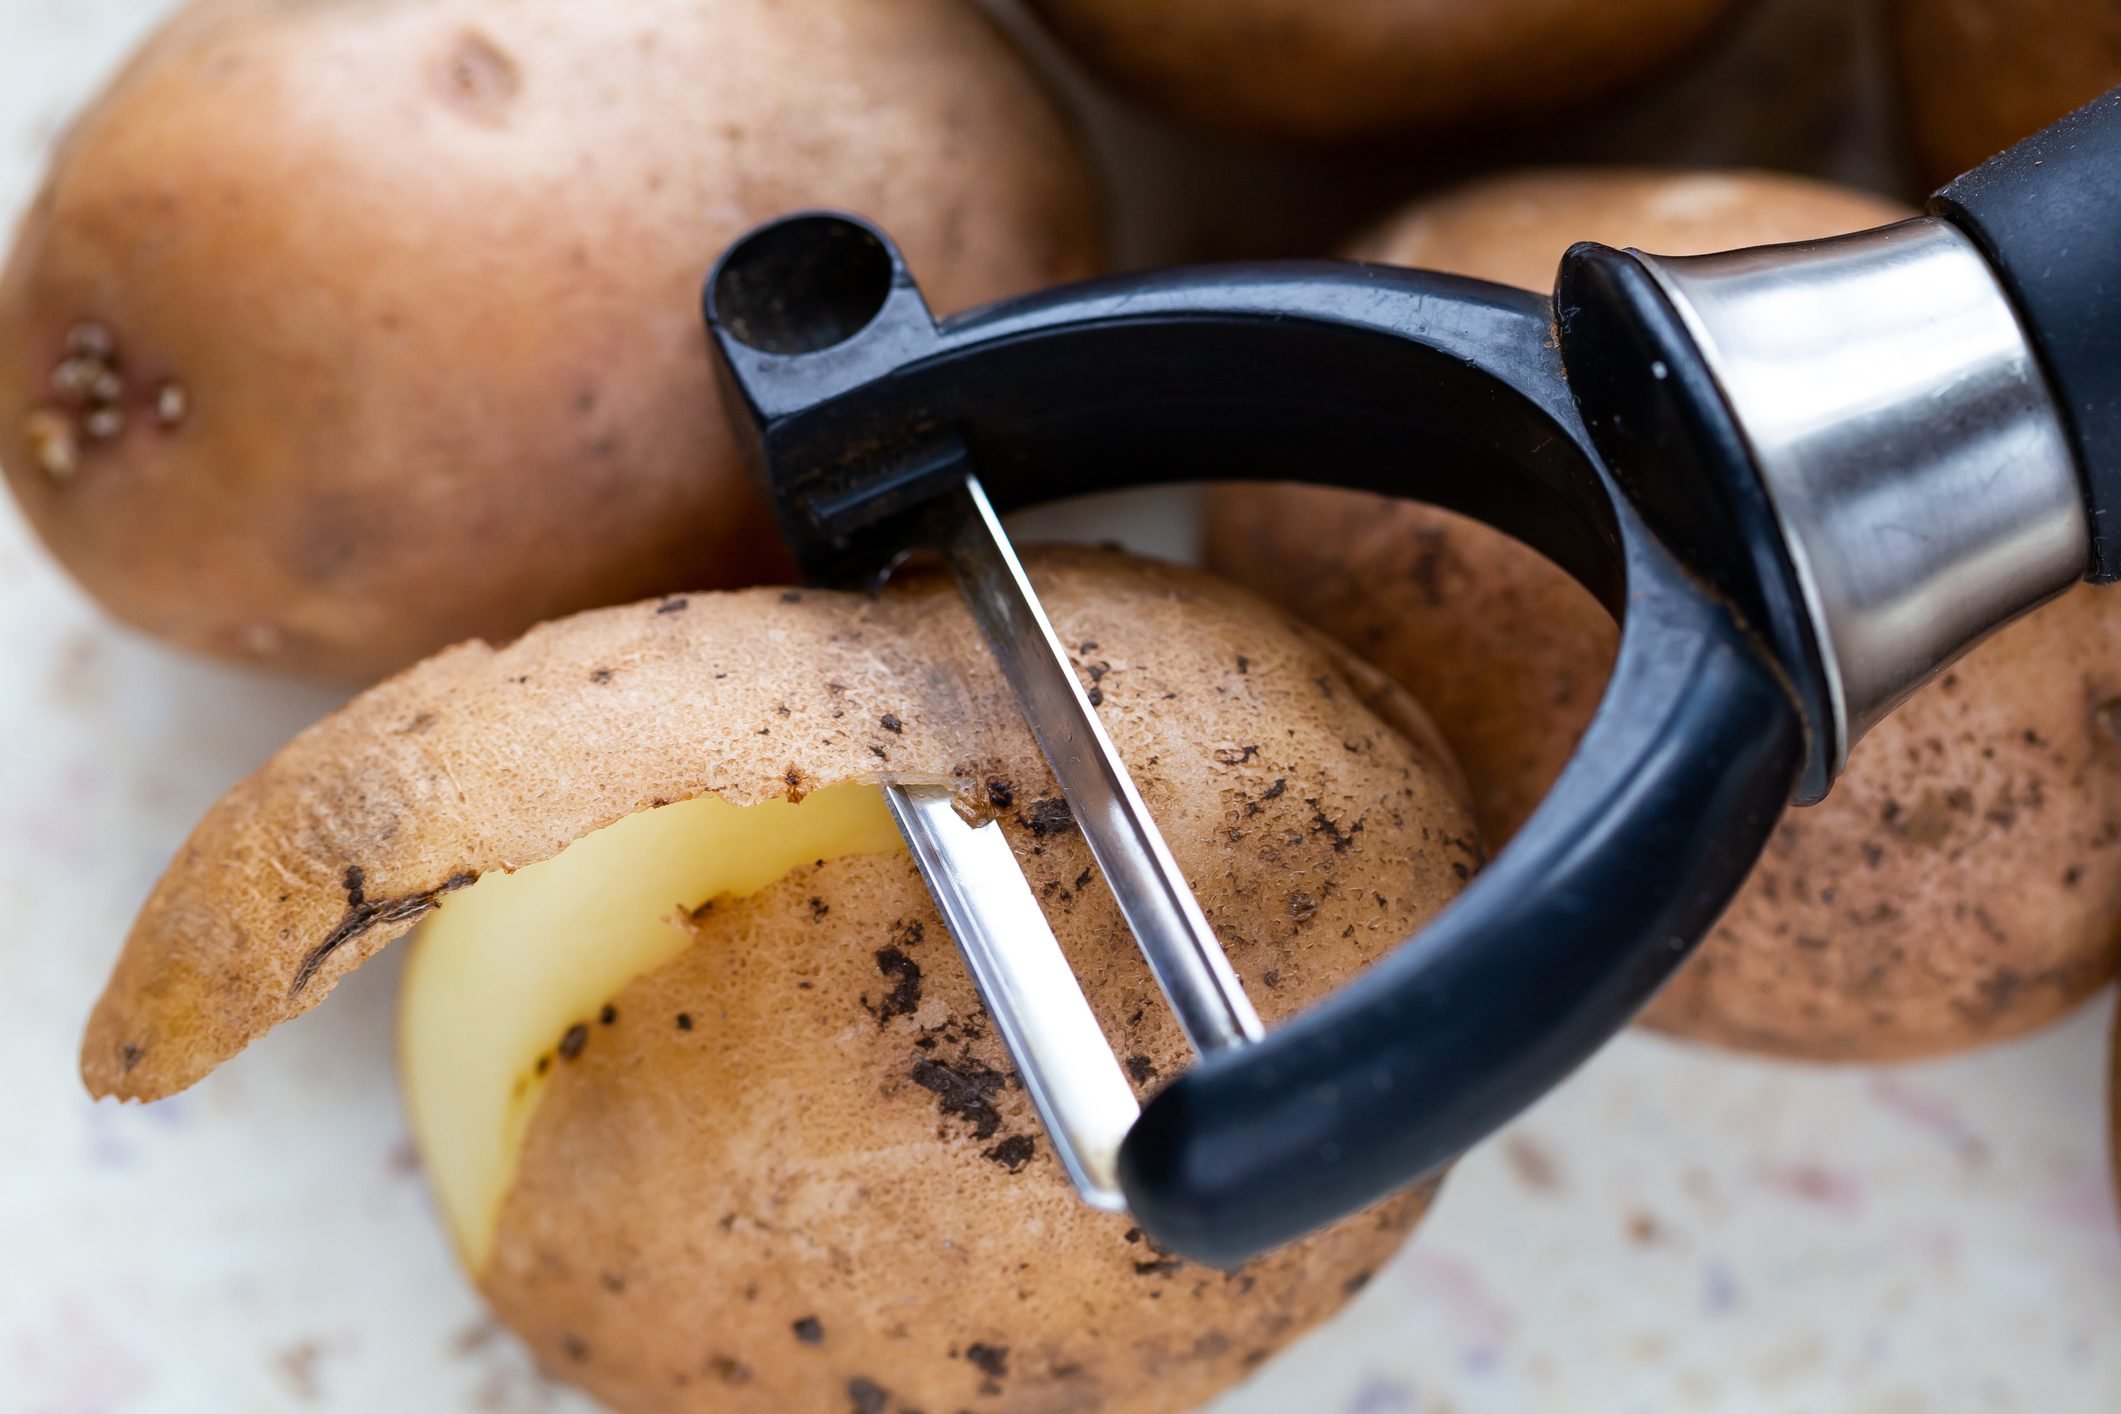 The Best Vegetable Peelers, Tested and Reviewed